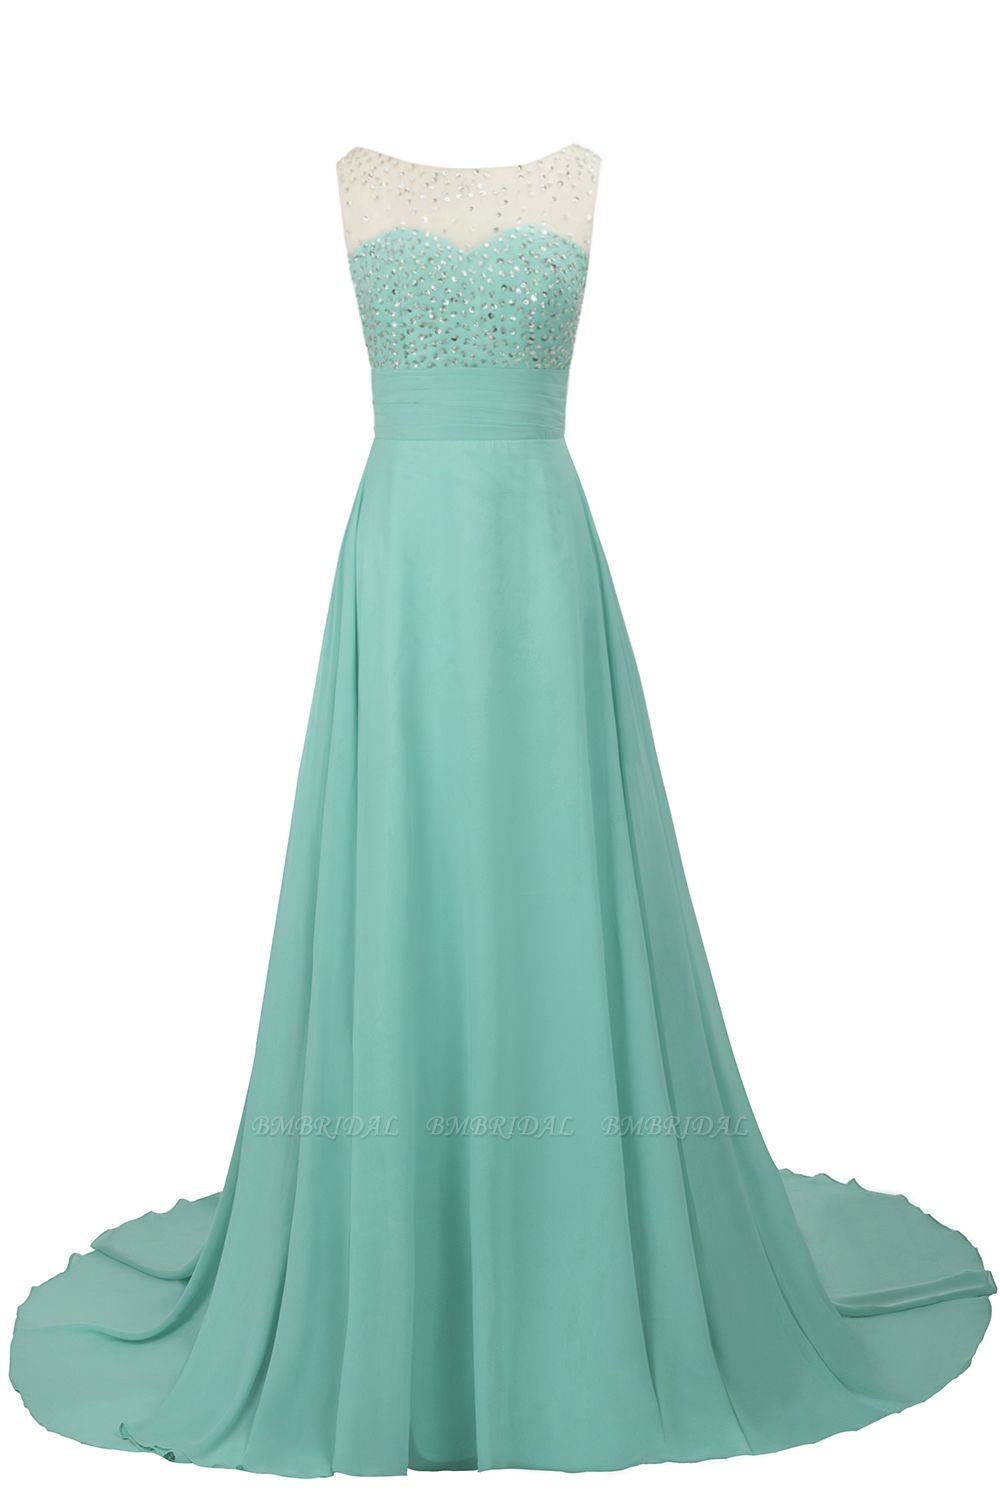 BMbridal Chic Jewel Chiffon Tulle Party Dress with Sequins